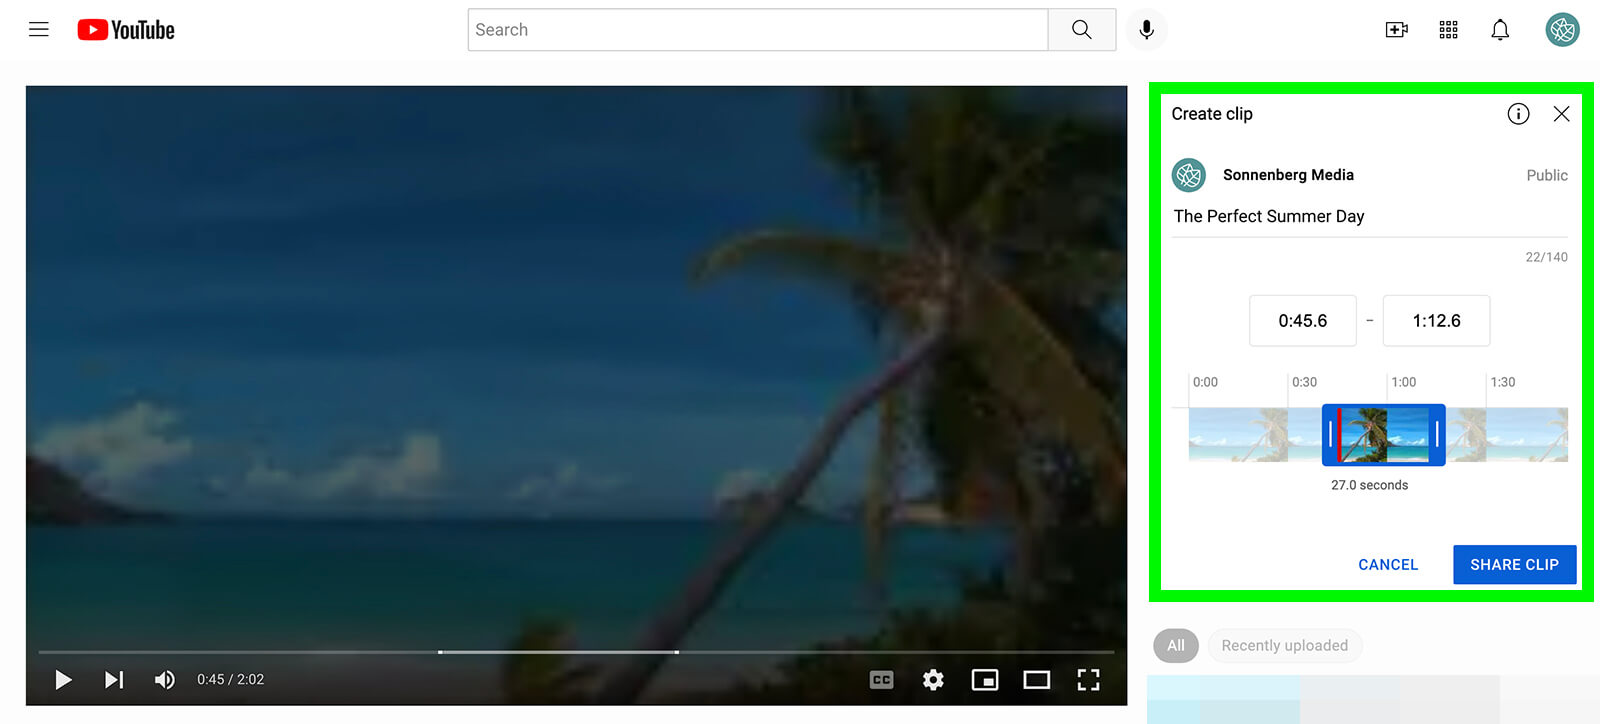 how-to-create-clips-youtube-own-video-content-slider-adjust-clip-sonnenberg-media-step-5